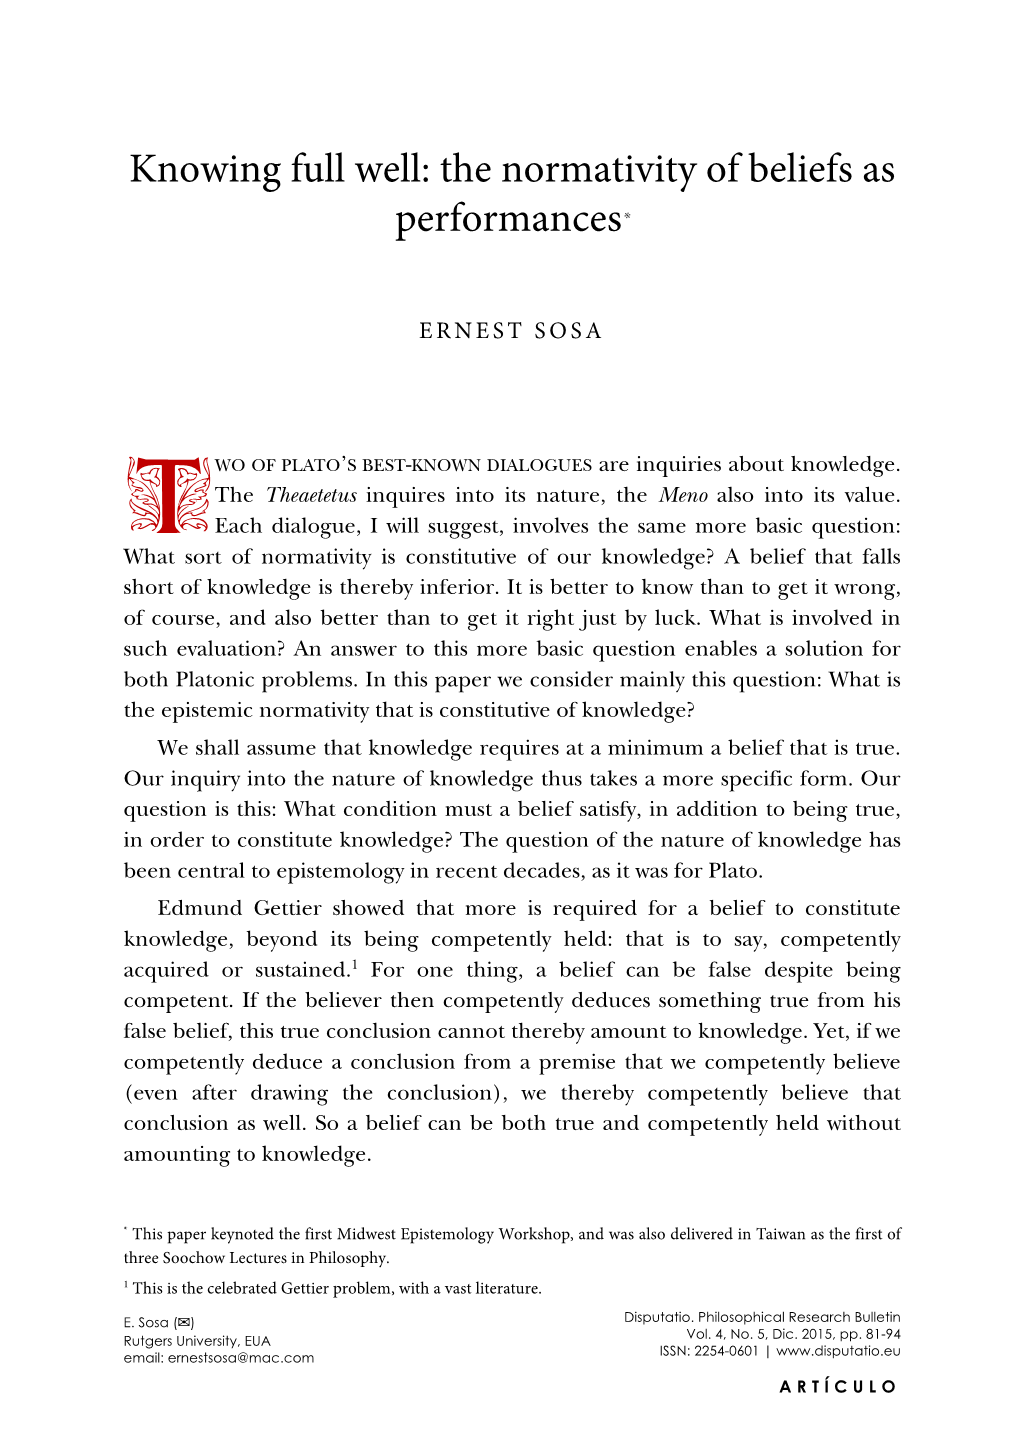 Knowing Full Well: the Normativity of Beliefs As Performances*